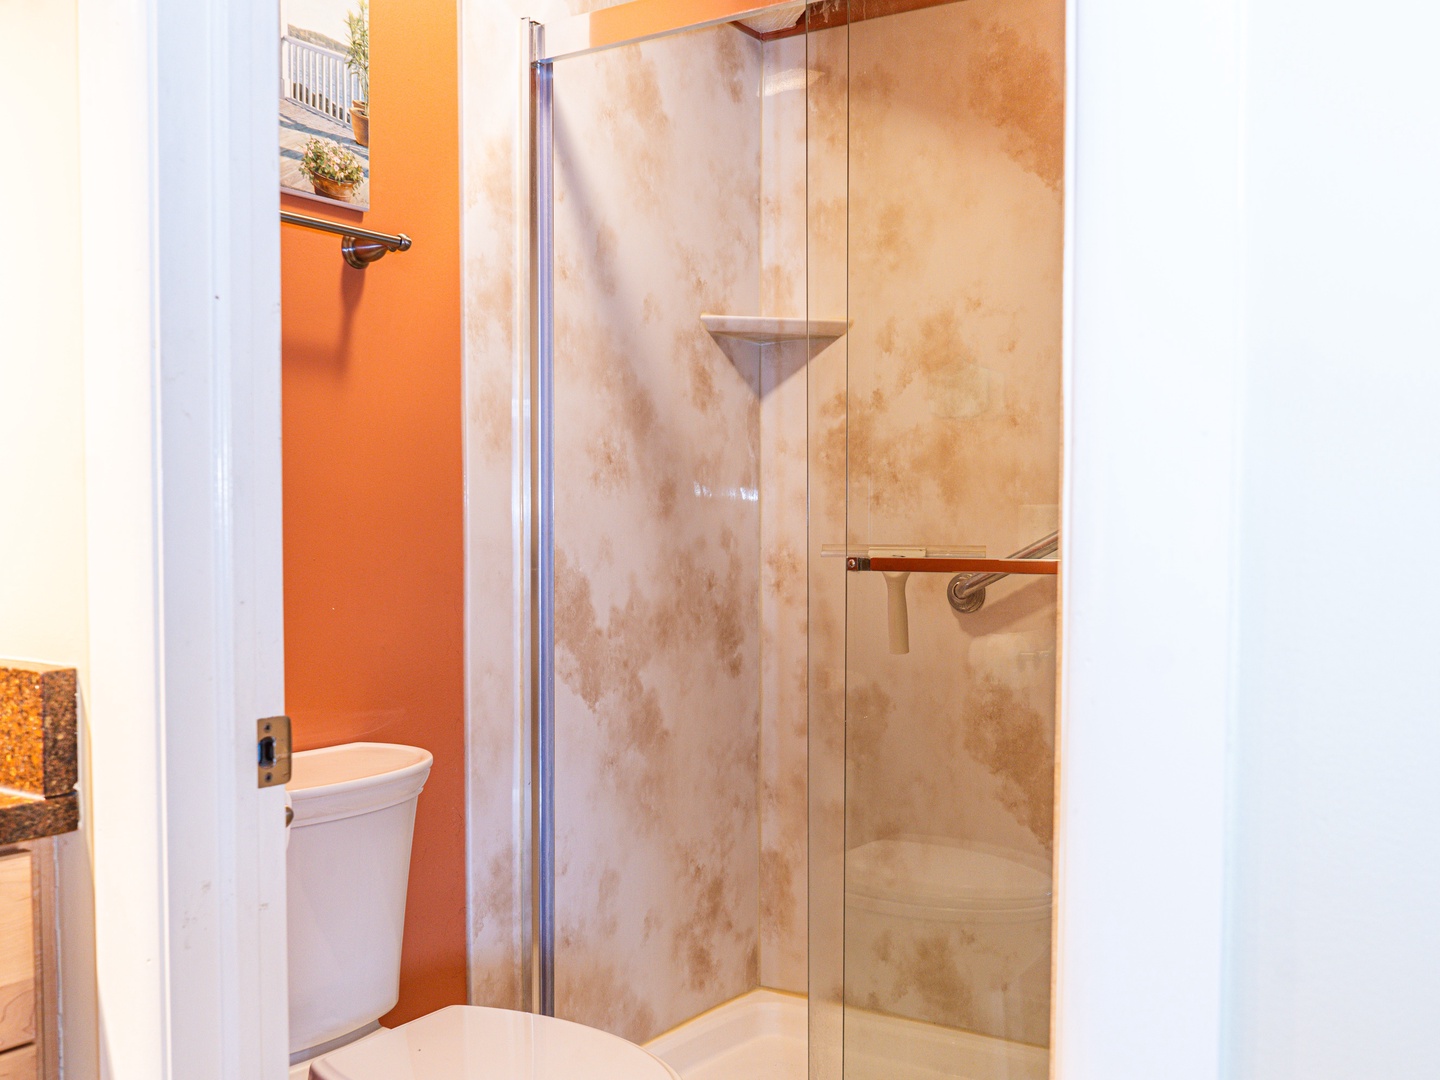 The full bathroom offers a single vanity with storage & glass shower